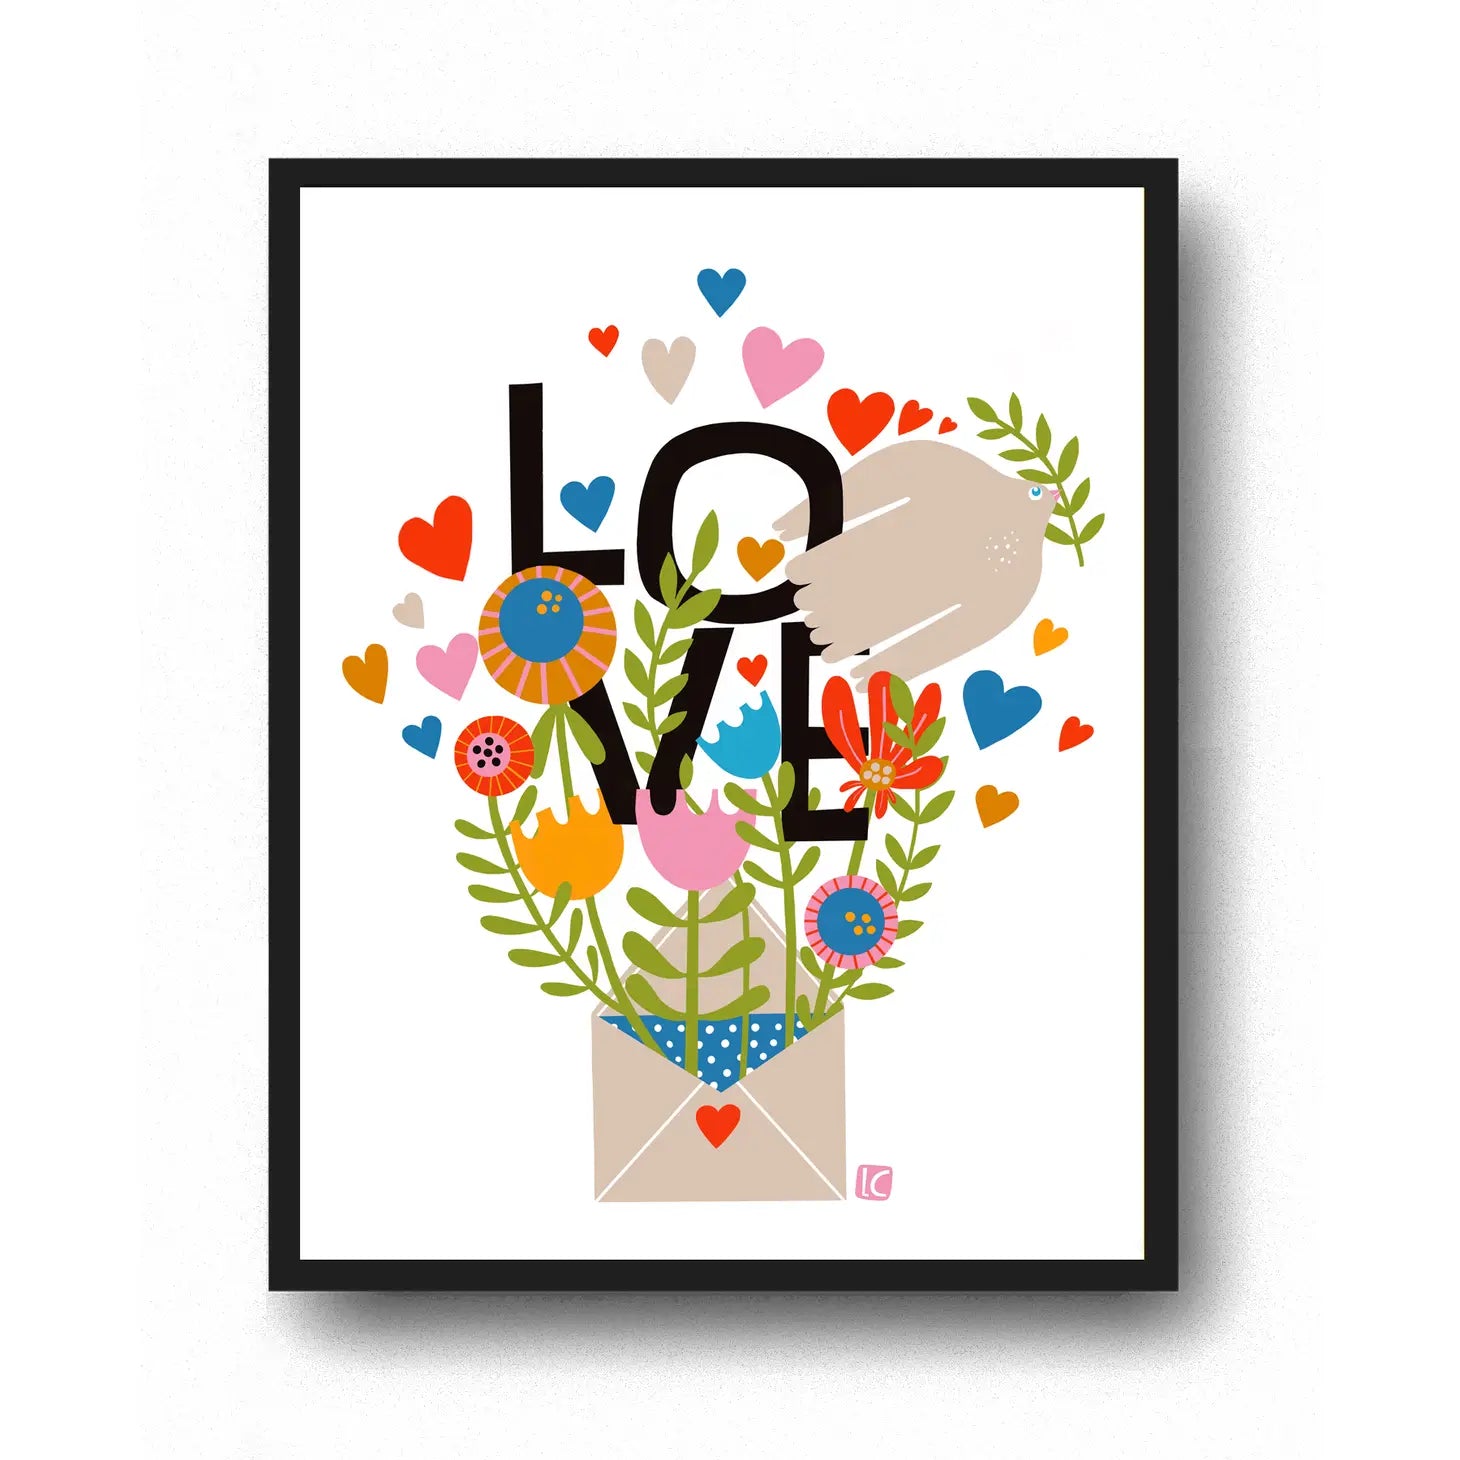 Love Letter - Giclee Print by Lisa Congdon